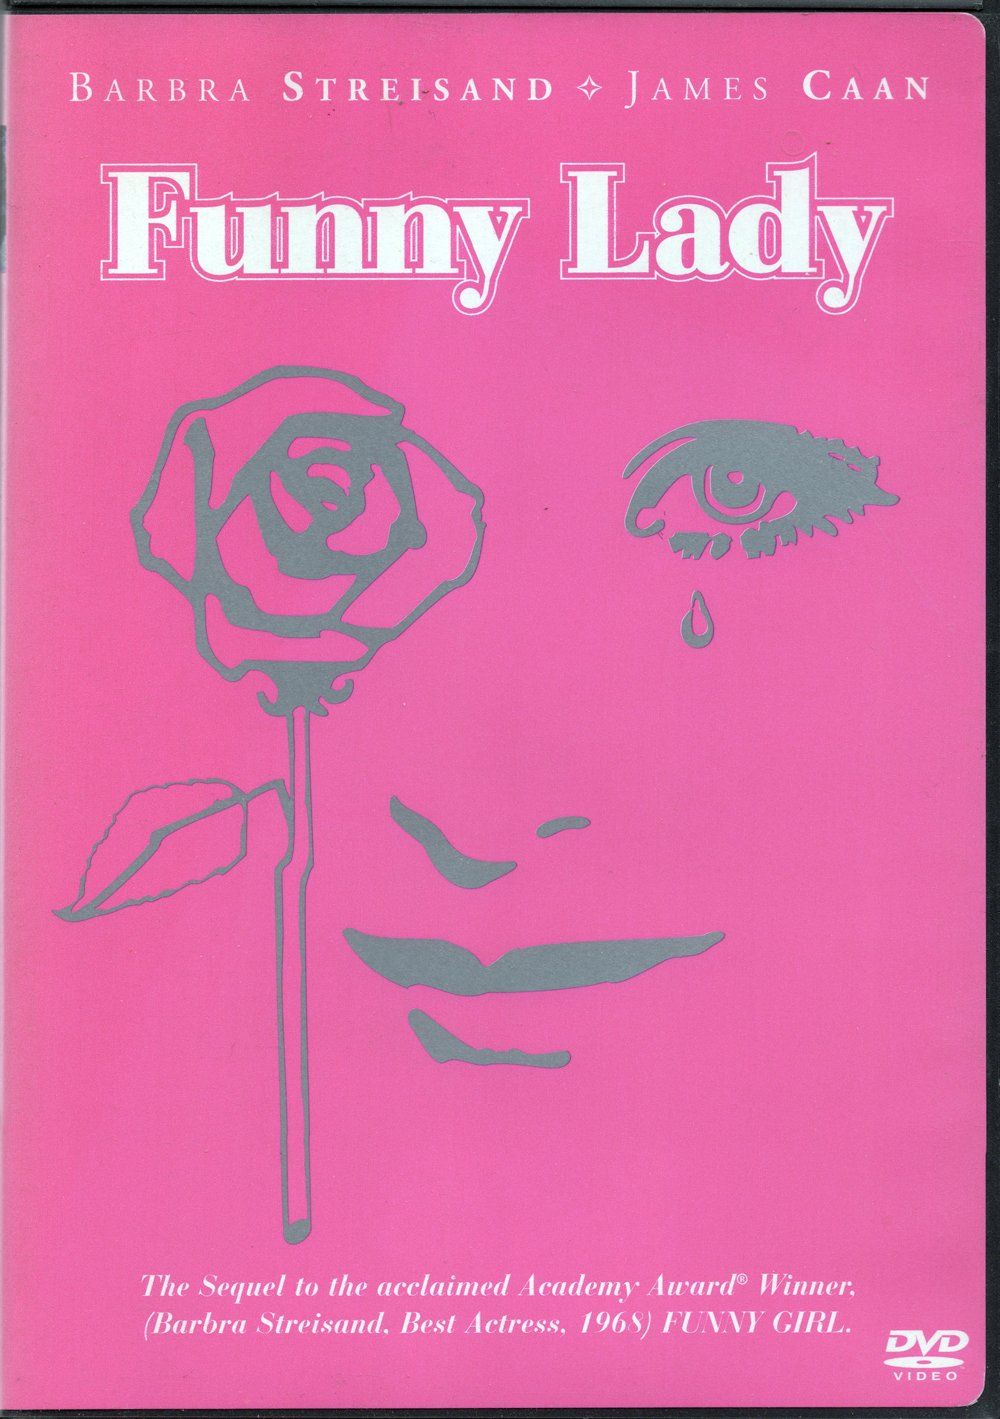 Cover of the 2002 Funny Lady DVD from Columbia Pictures.